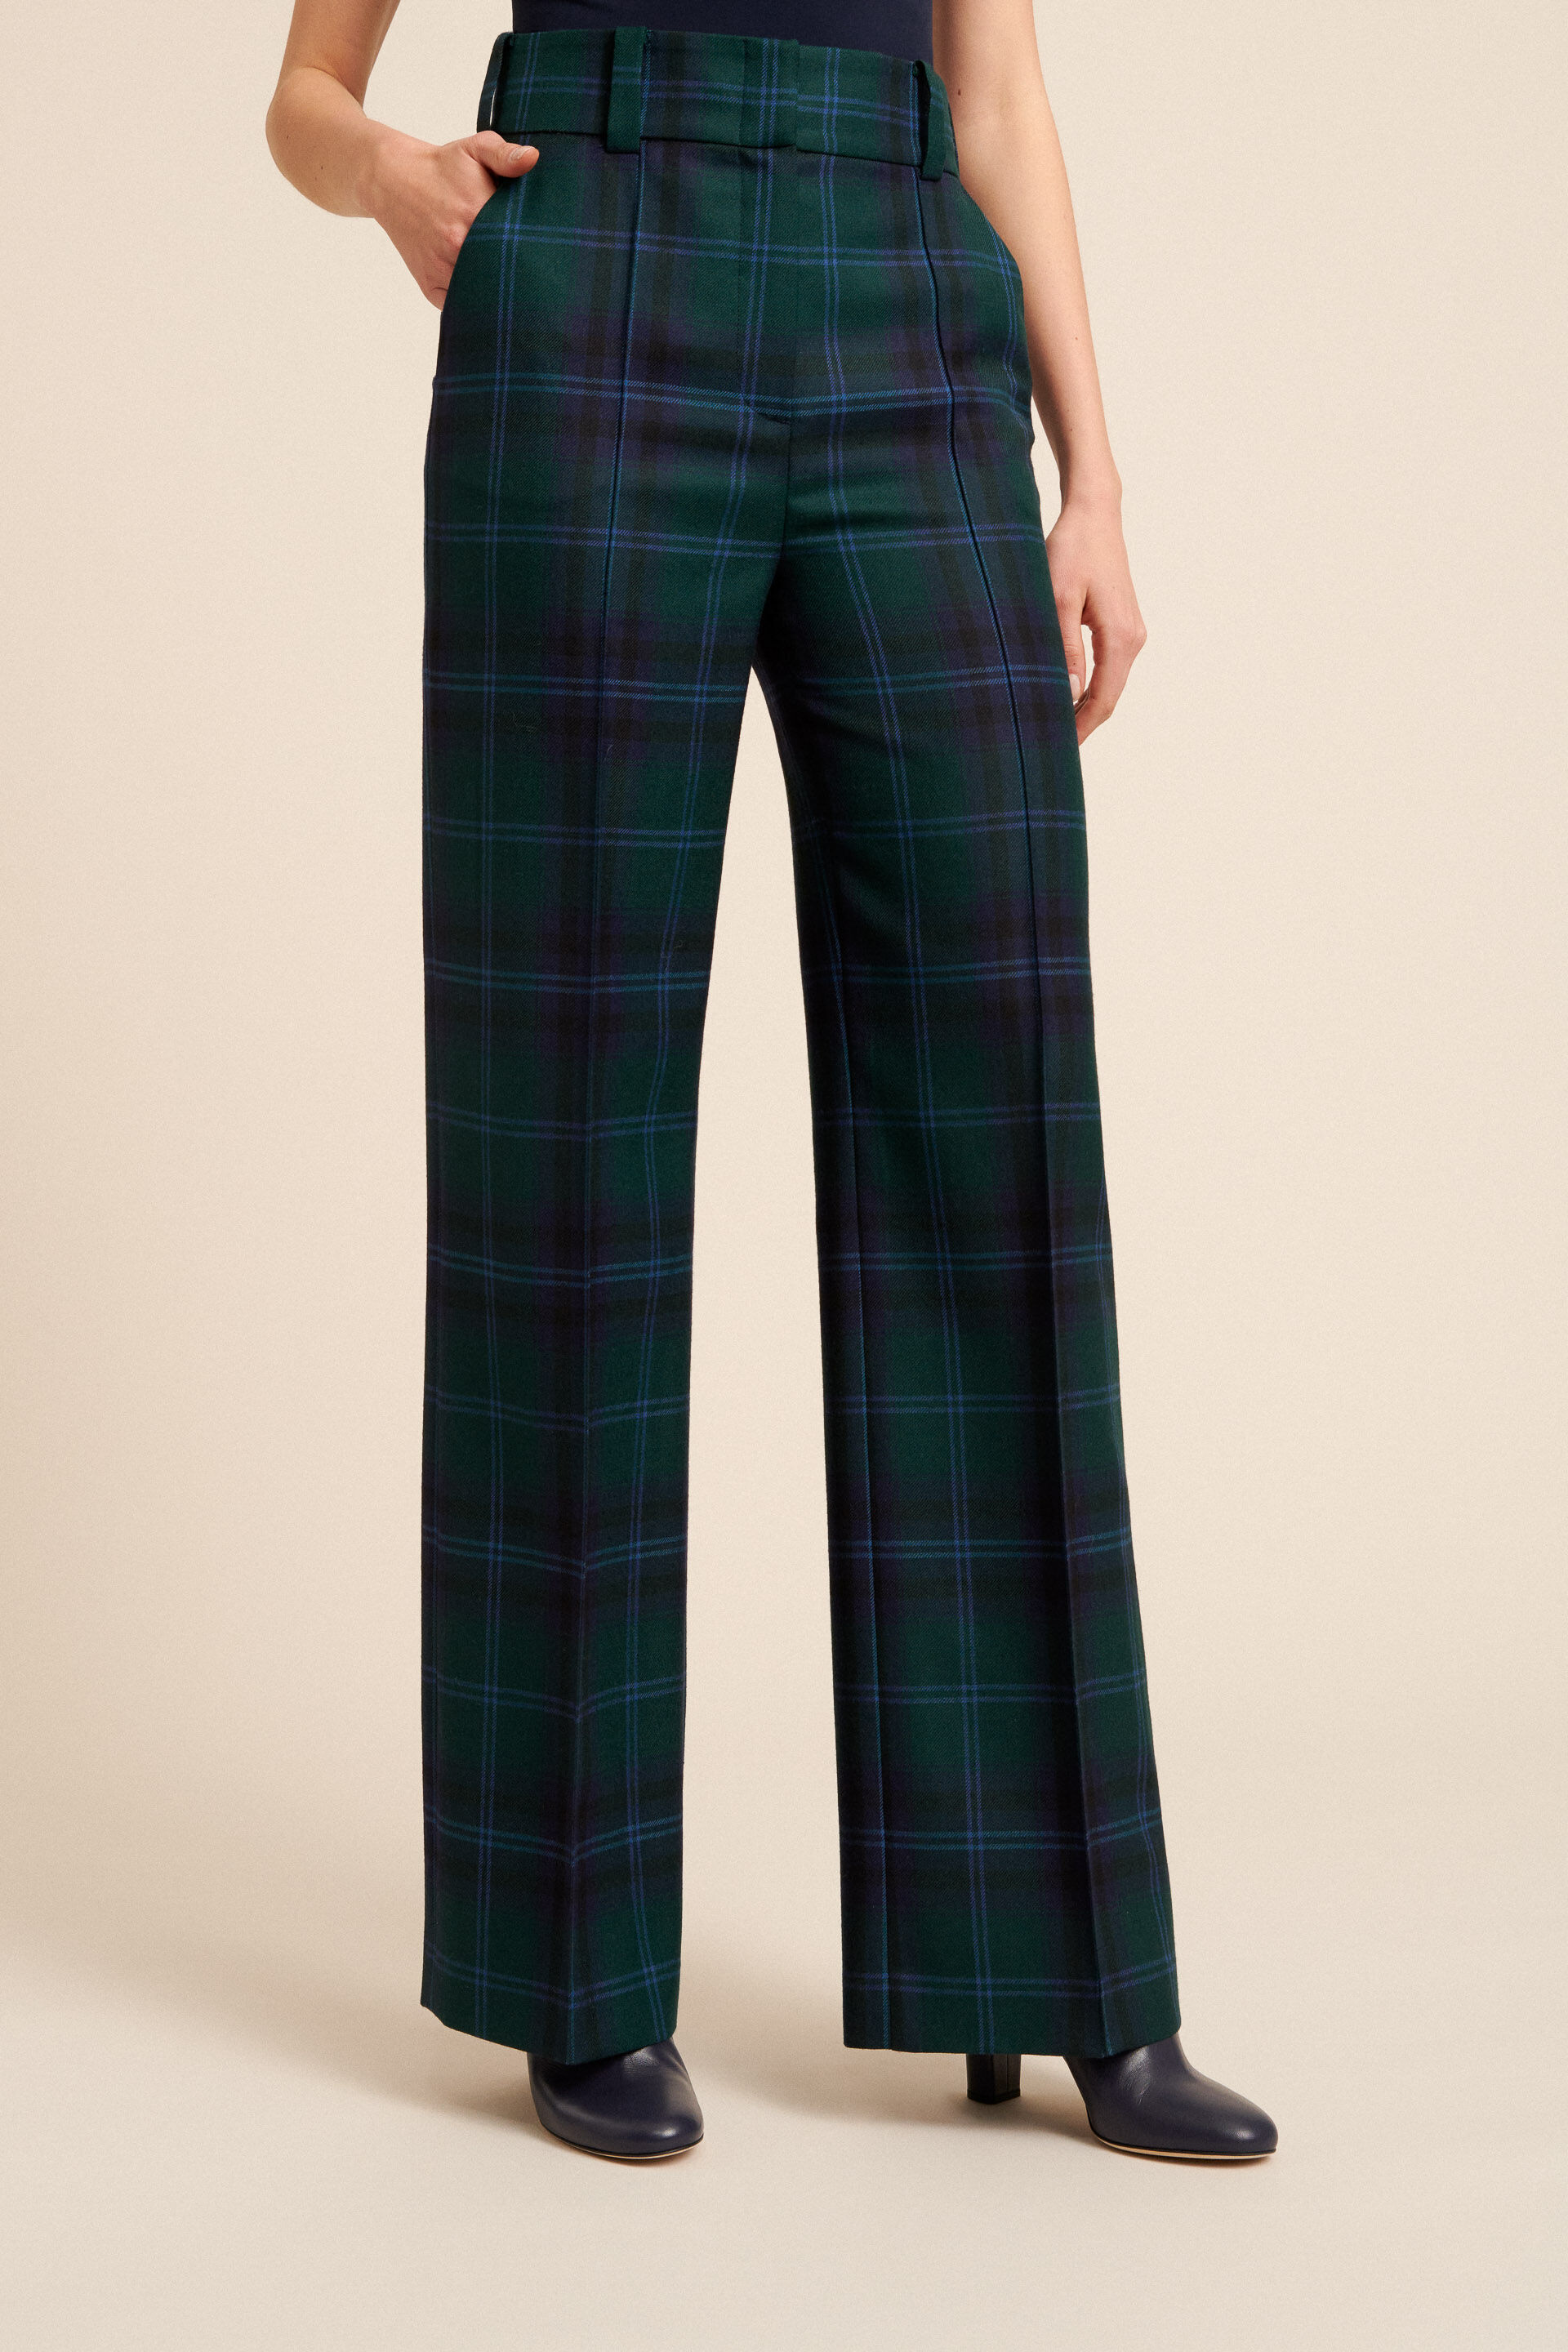 Hell Bunny Brody Red Tartan Punk Cigarette Trousers